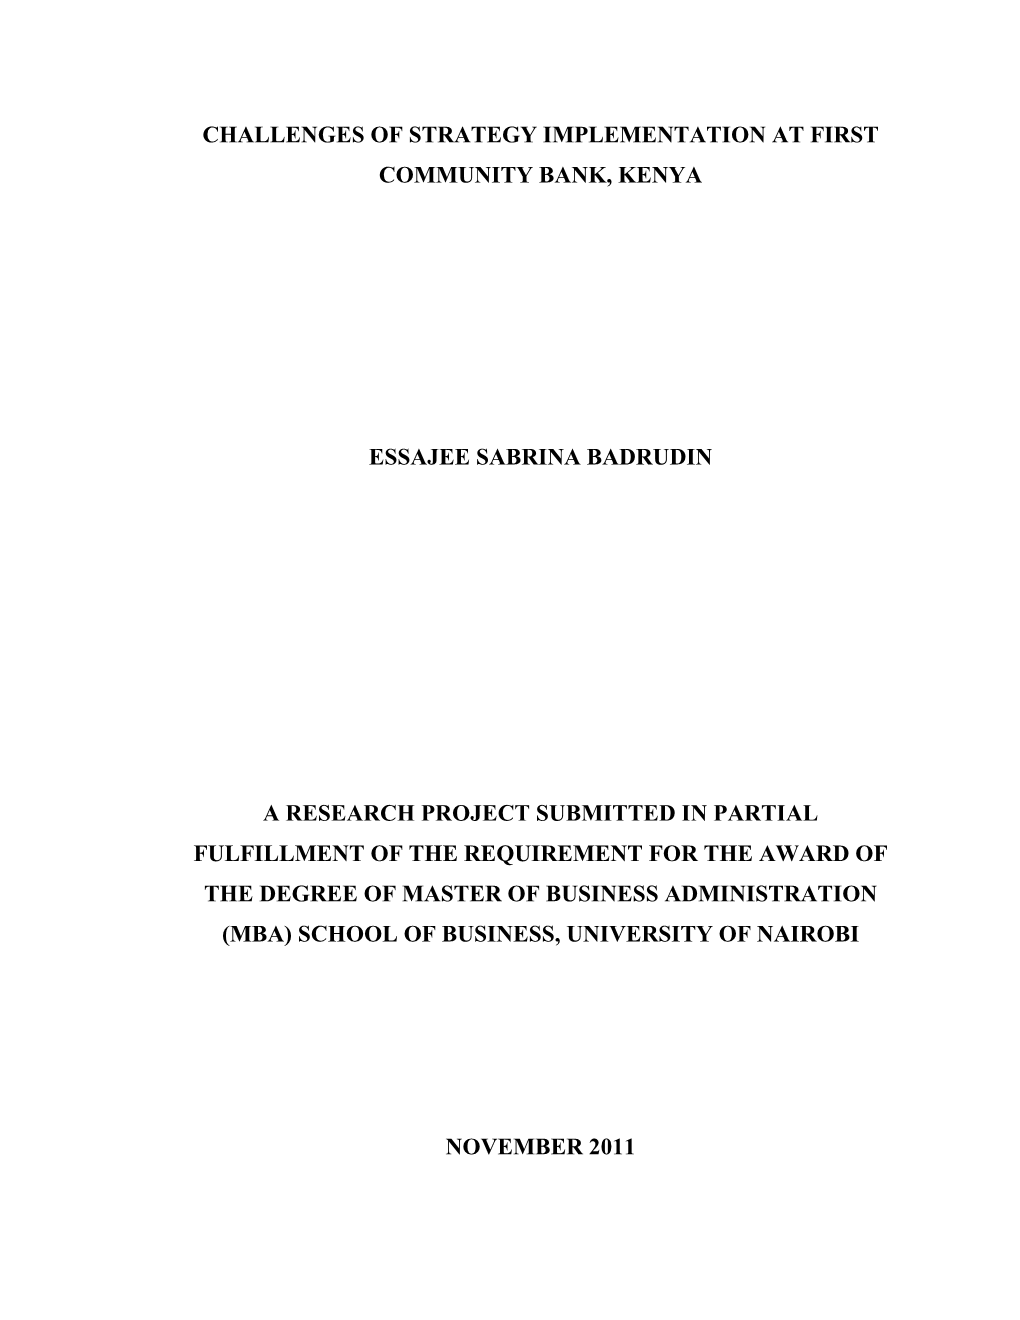 Challenges of Strategy Implementation at First Community Bank, Kenya